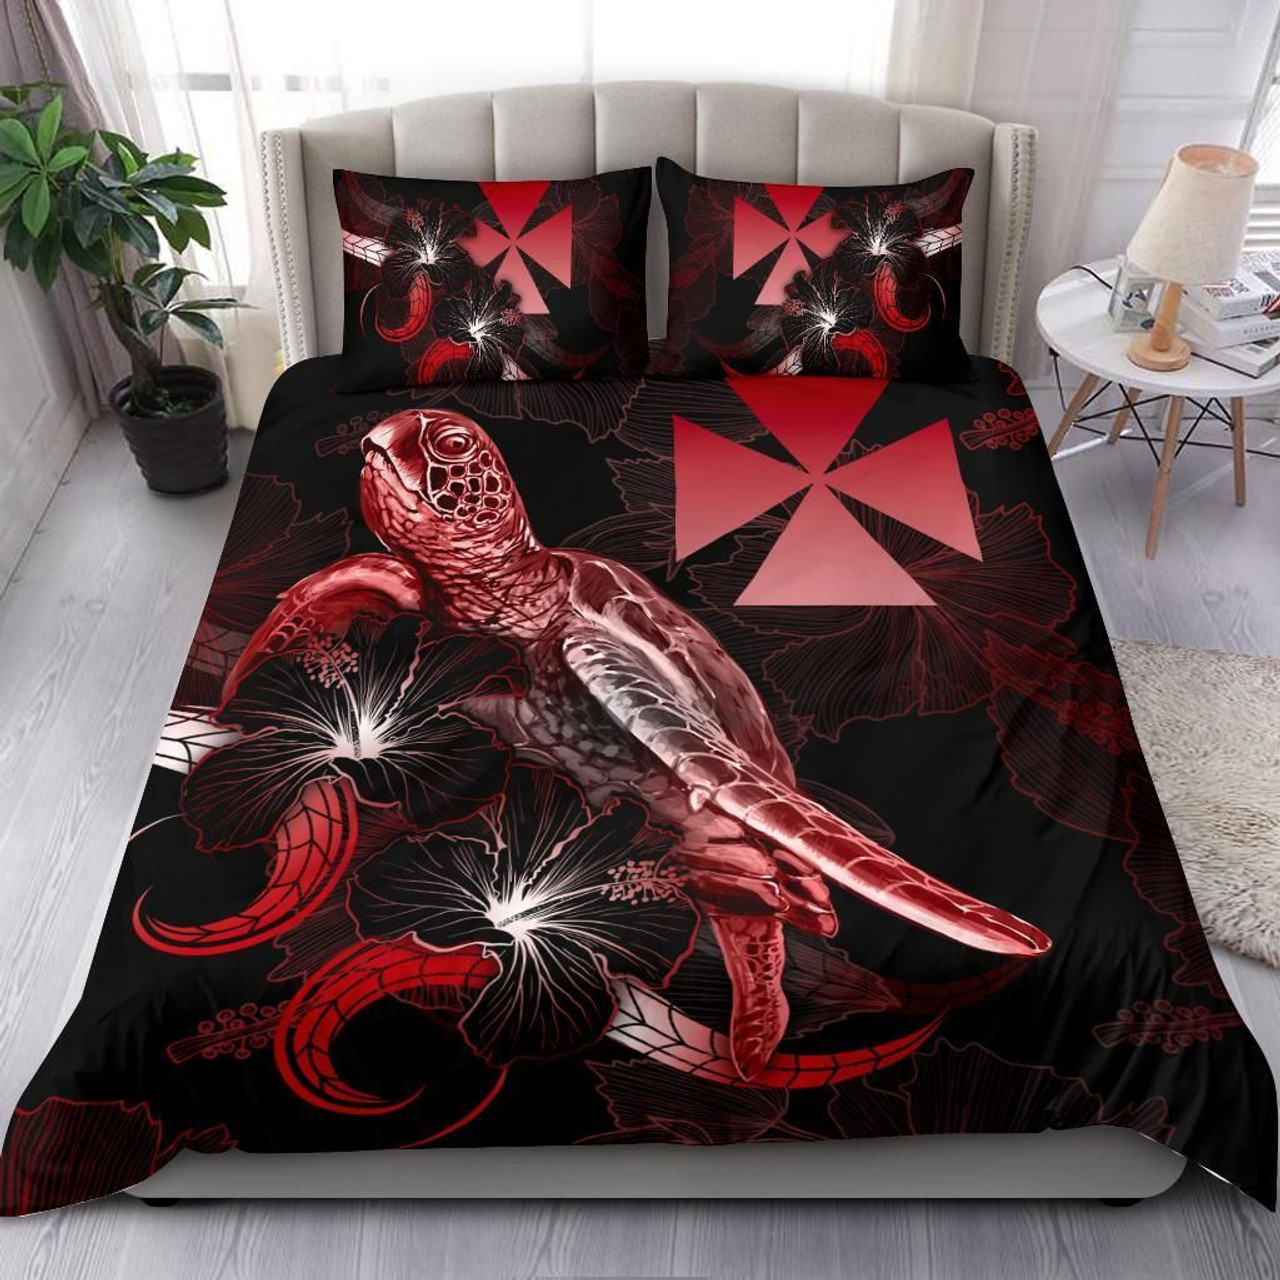 Wallis And Futuna Polynesian Bedding Set - Turtle With Blooming Hibiscus Red 1